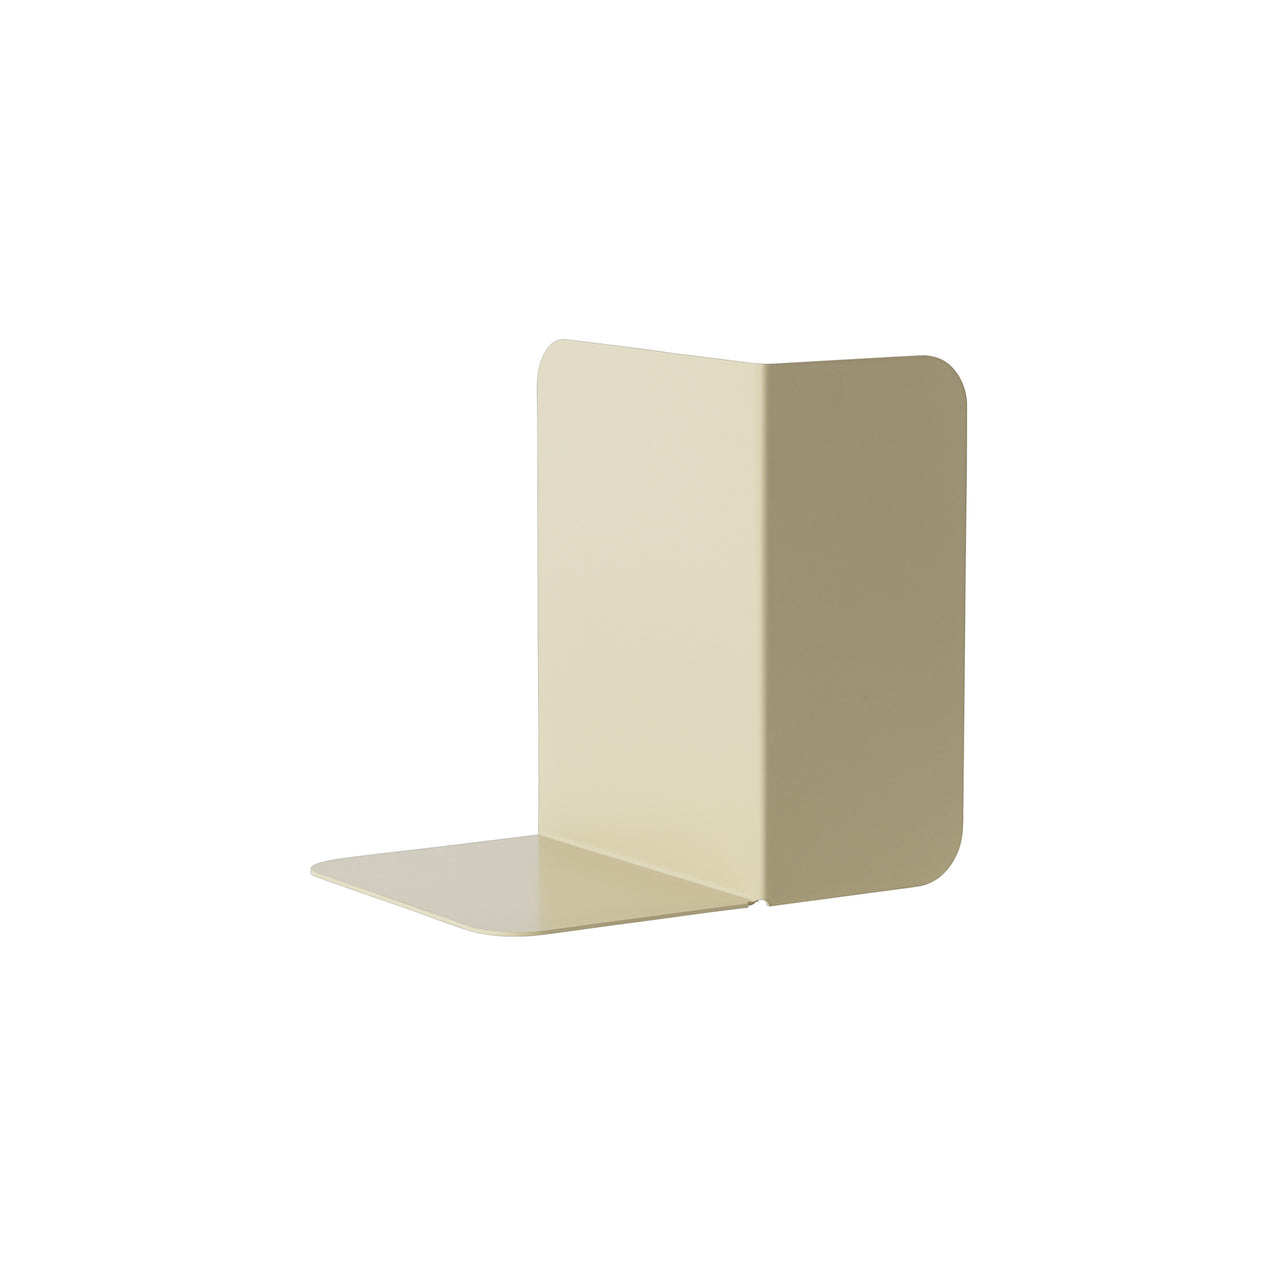 Compile Bookend: Beige-Green